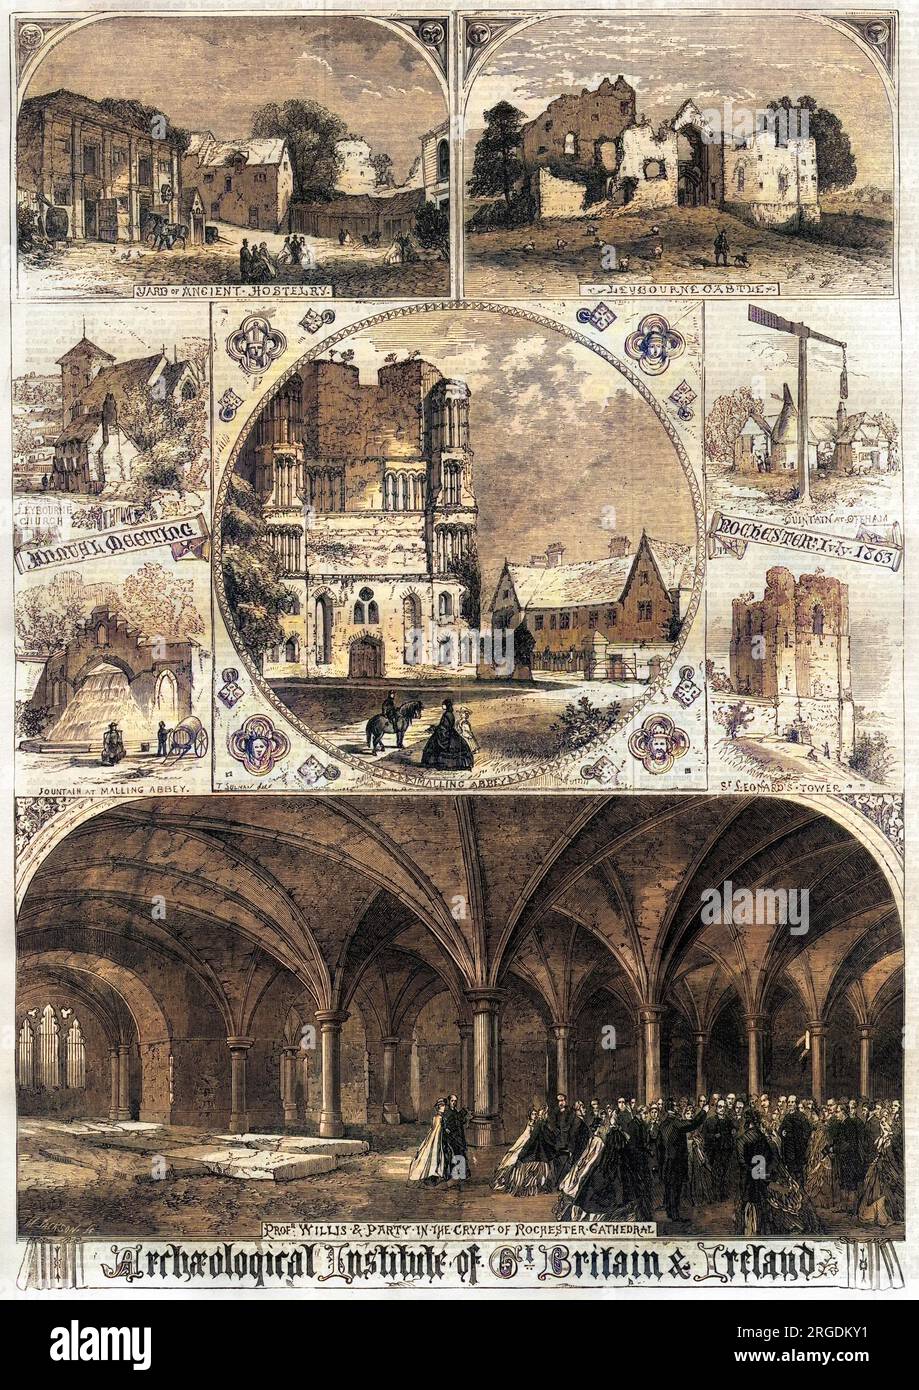 A commerative page in the Illustrated London News, marking the Archaelogical Institute of Great Britain and Ireland's annual meeting at Rochester, July 1863. The yard of ancient hostelry, Leybourne Castle and church, the quintain at Offham, Malling Abbey and its the fountain and St Leonard's Tower are shown, as well and Professor Willis and party in the crypt of Rochester Cathedral. Stock Photo